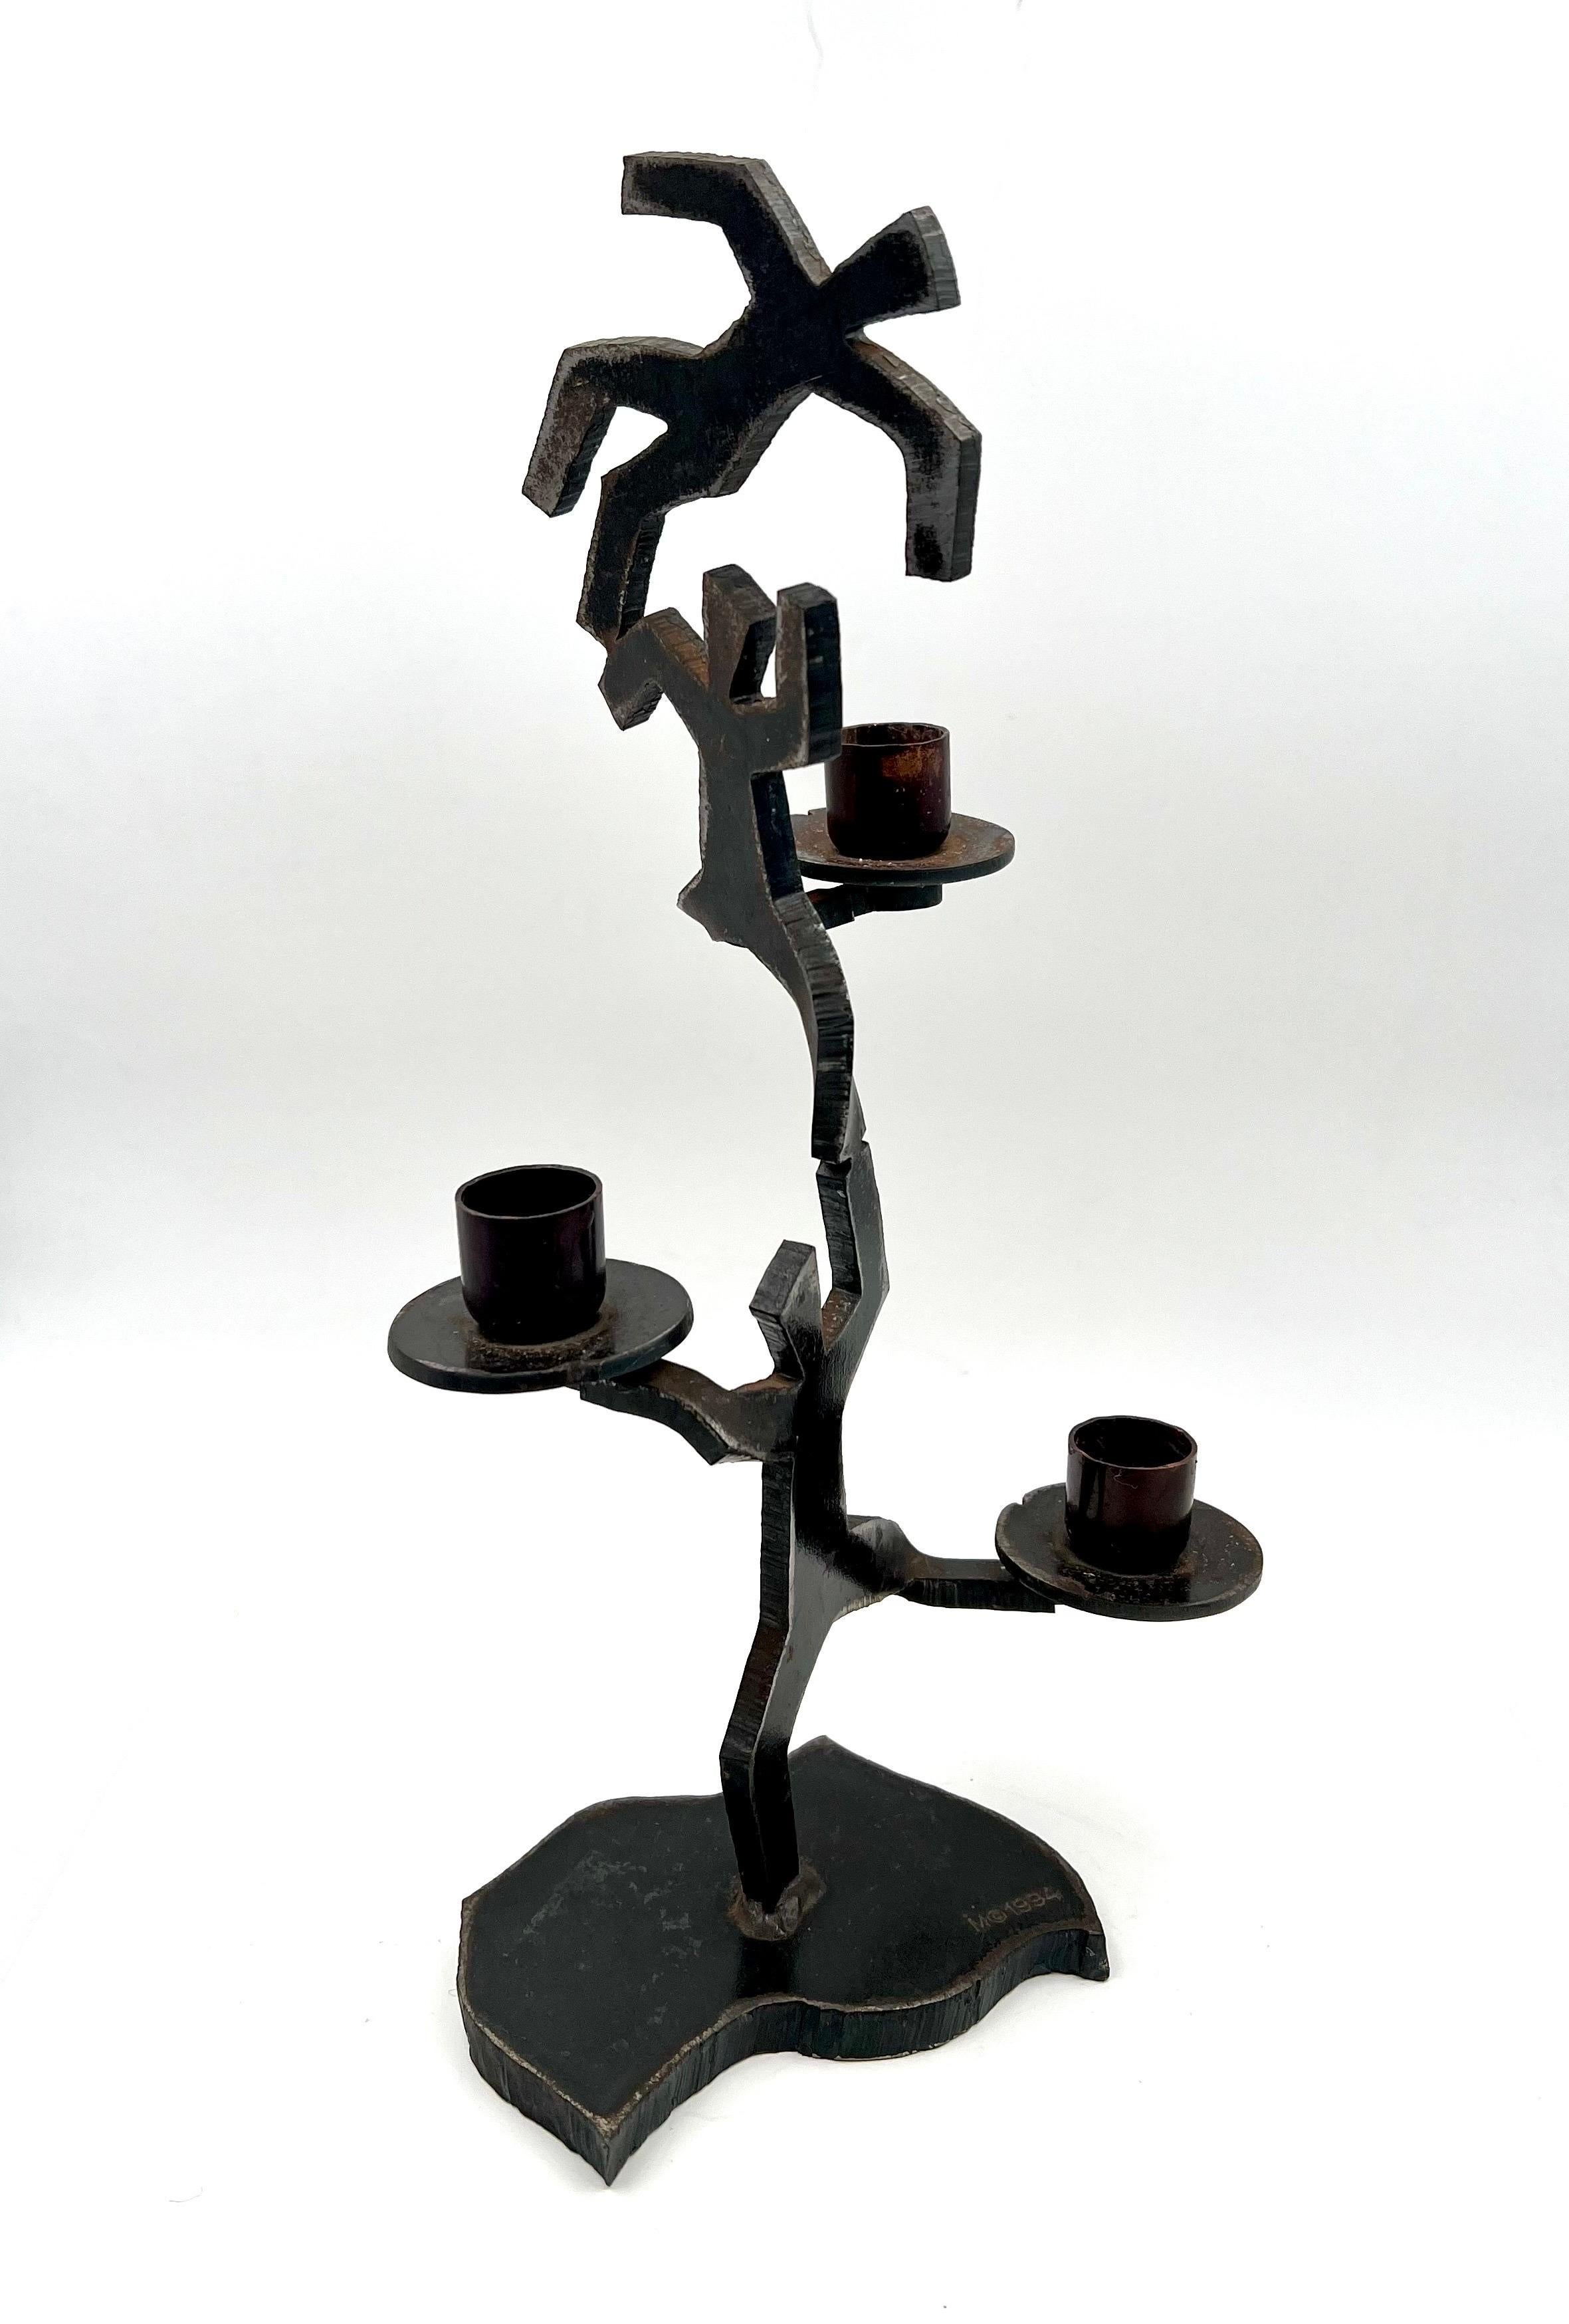 A rare candle holder Stamped M 1994, fire torch welded iron figurines after Keith Haring, each holder takes a 3/4